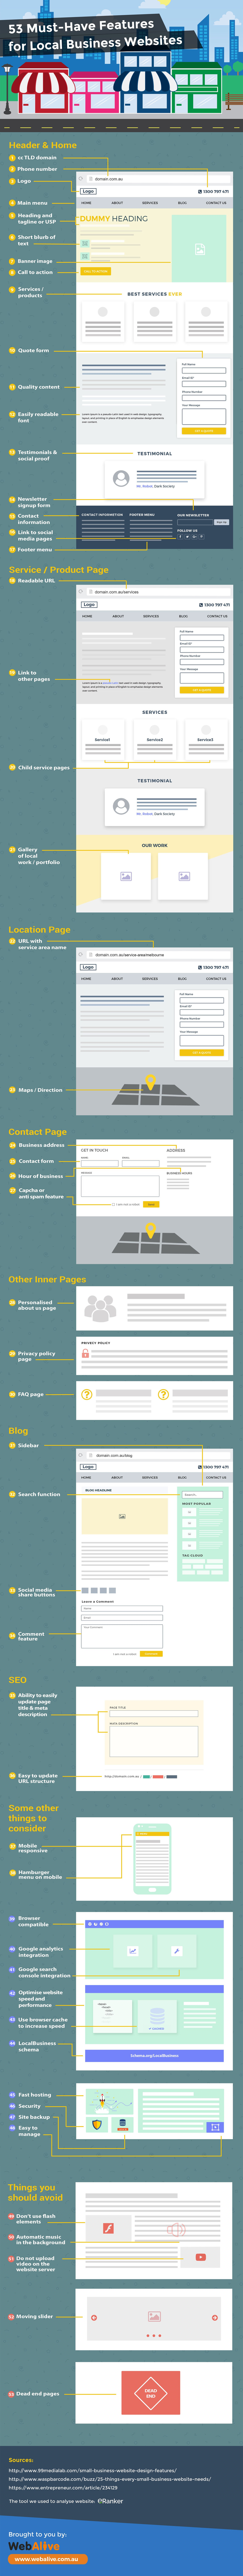 website features for local business websites - infographic